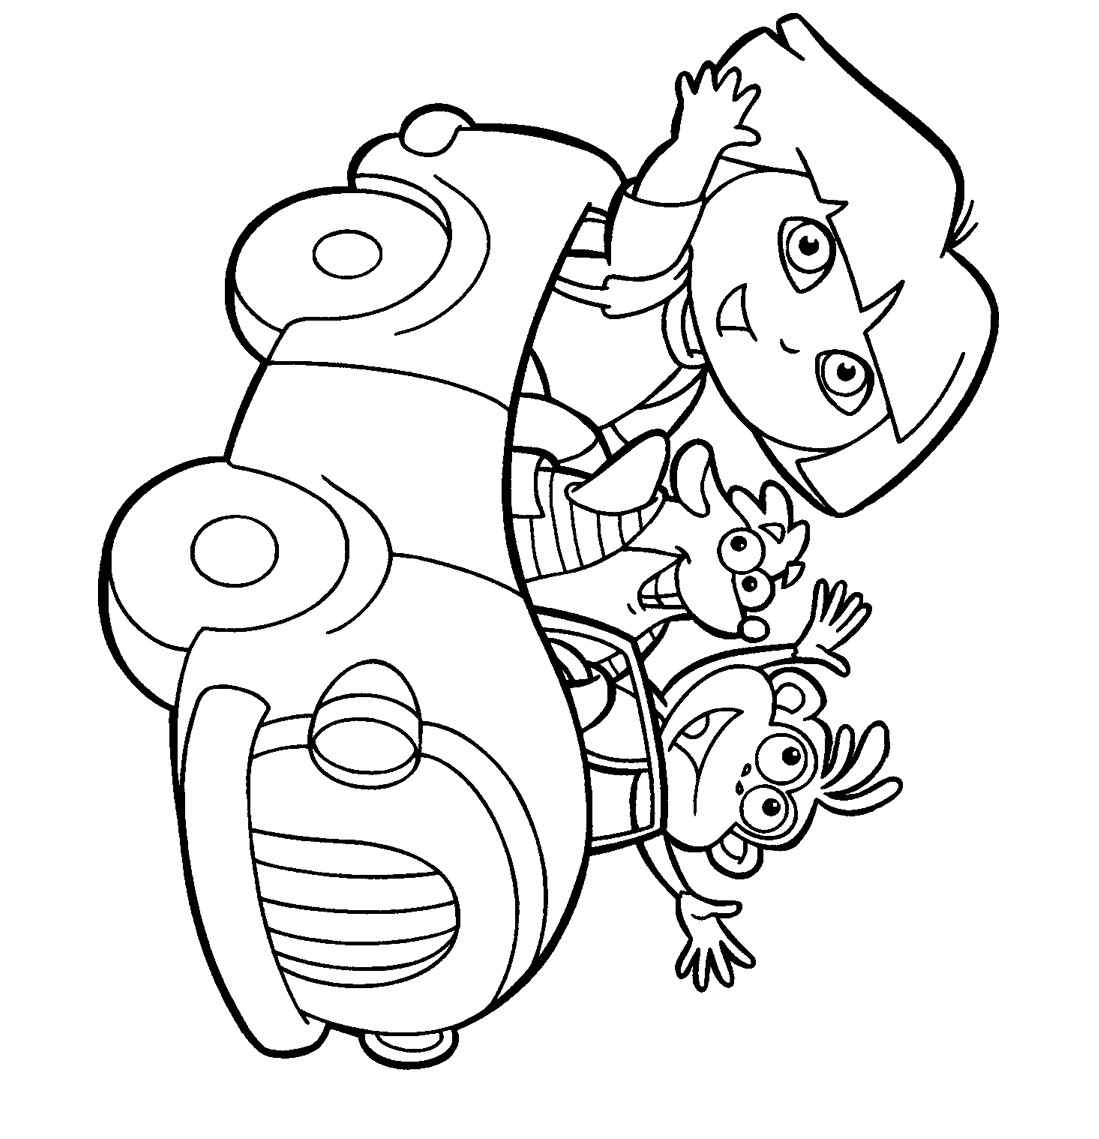 Kids Coloring Books
 Printable coloring pages for kids